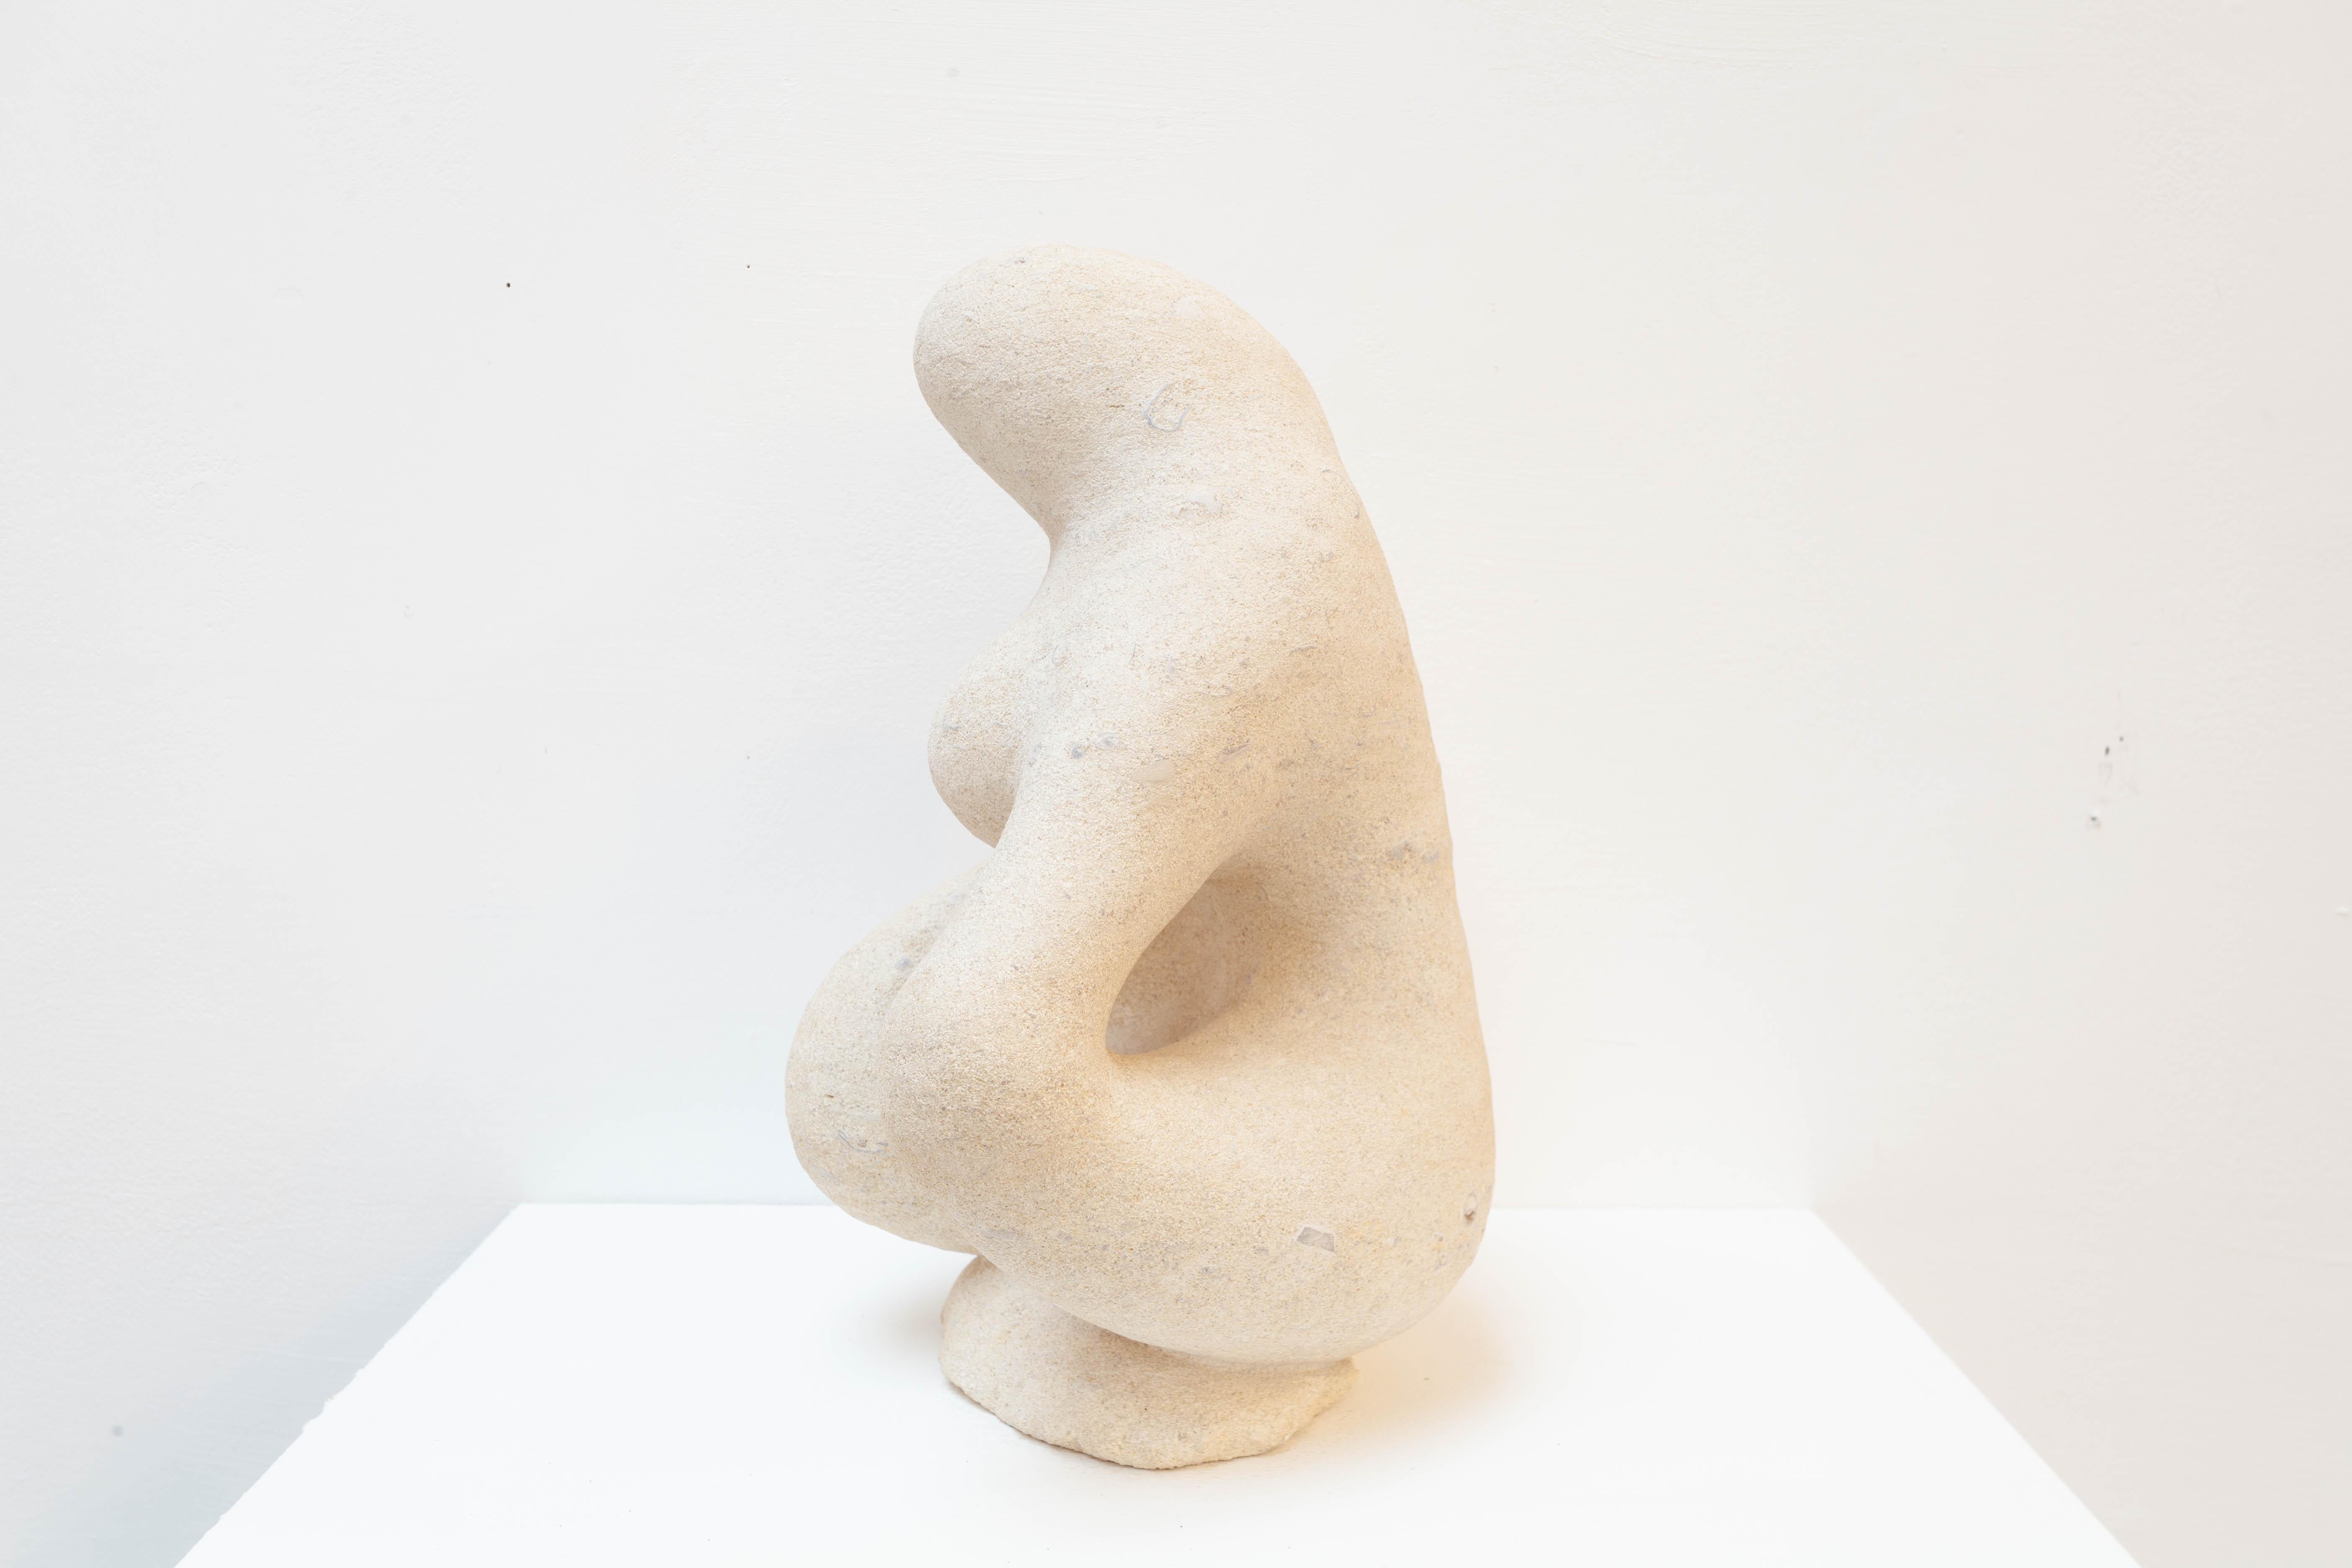 Abstract Figure - Sculpture by Alison McGechie